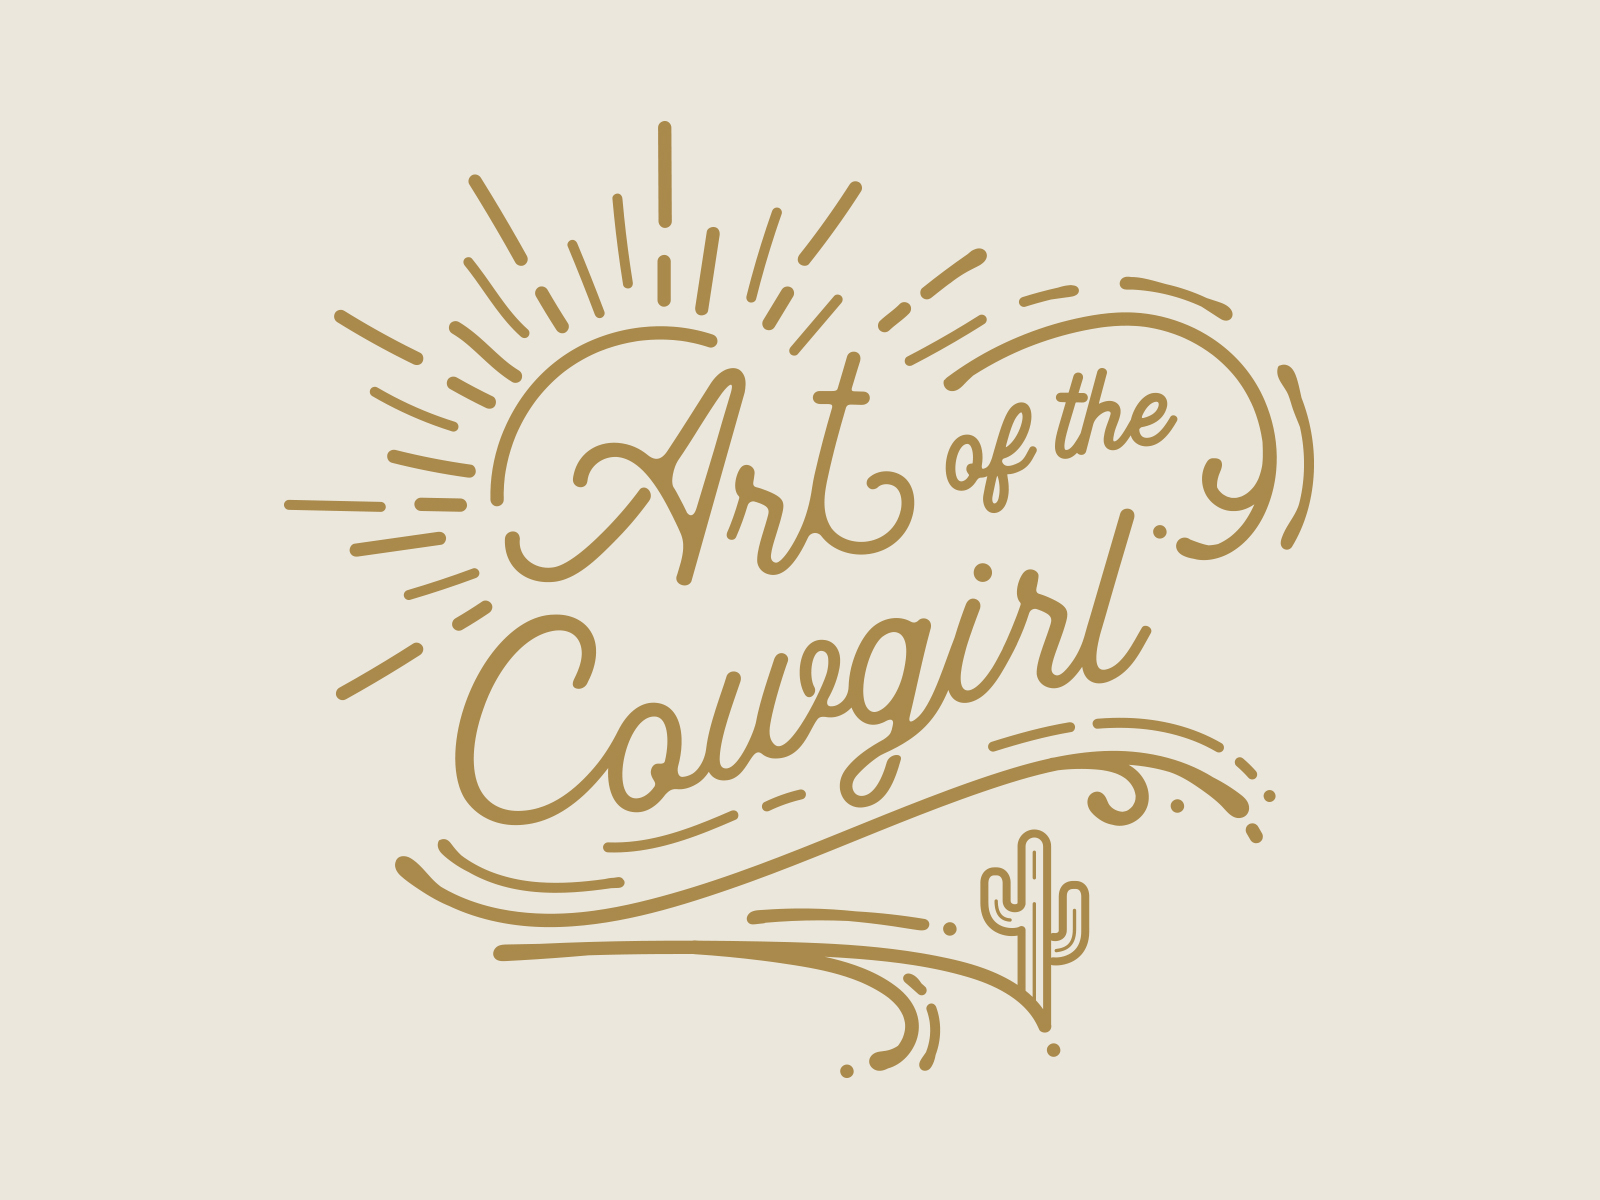 Art Of The Cowgirl Shirt Design By Lauren Summers On Dribbble